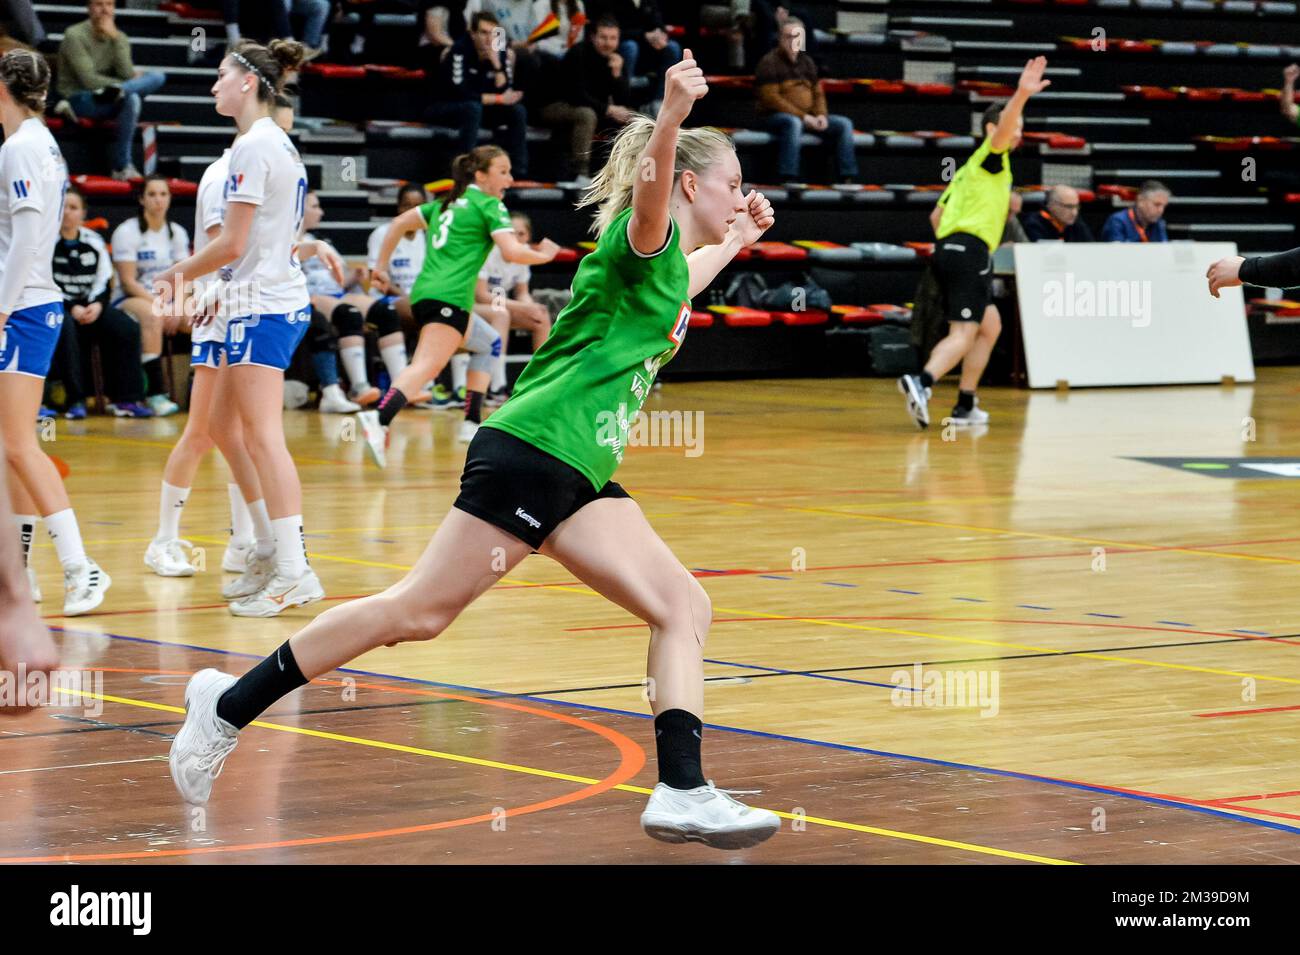 Celebration of Sam Robyns (11) of Initia Hasselt after scoring a goal  during a game between Initia Hasselt and Handball Femina Vise, Saturday 09  April 2022, in Hasselt, the women's final of